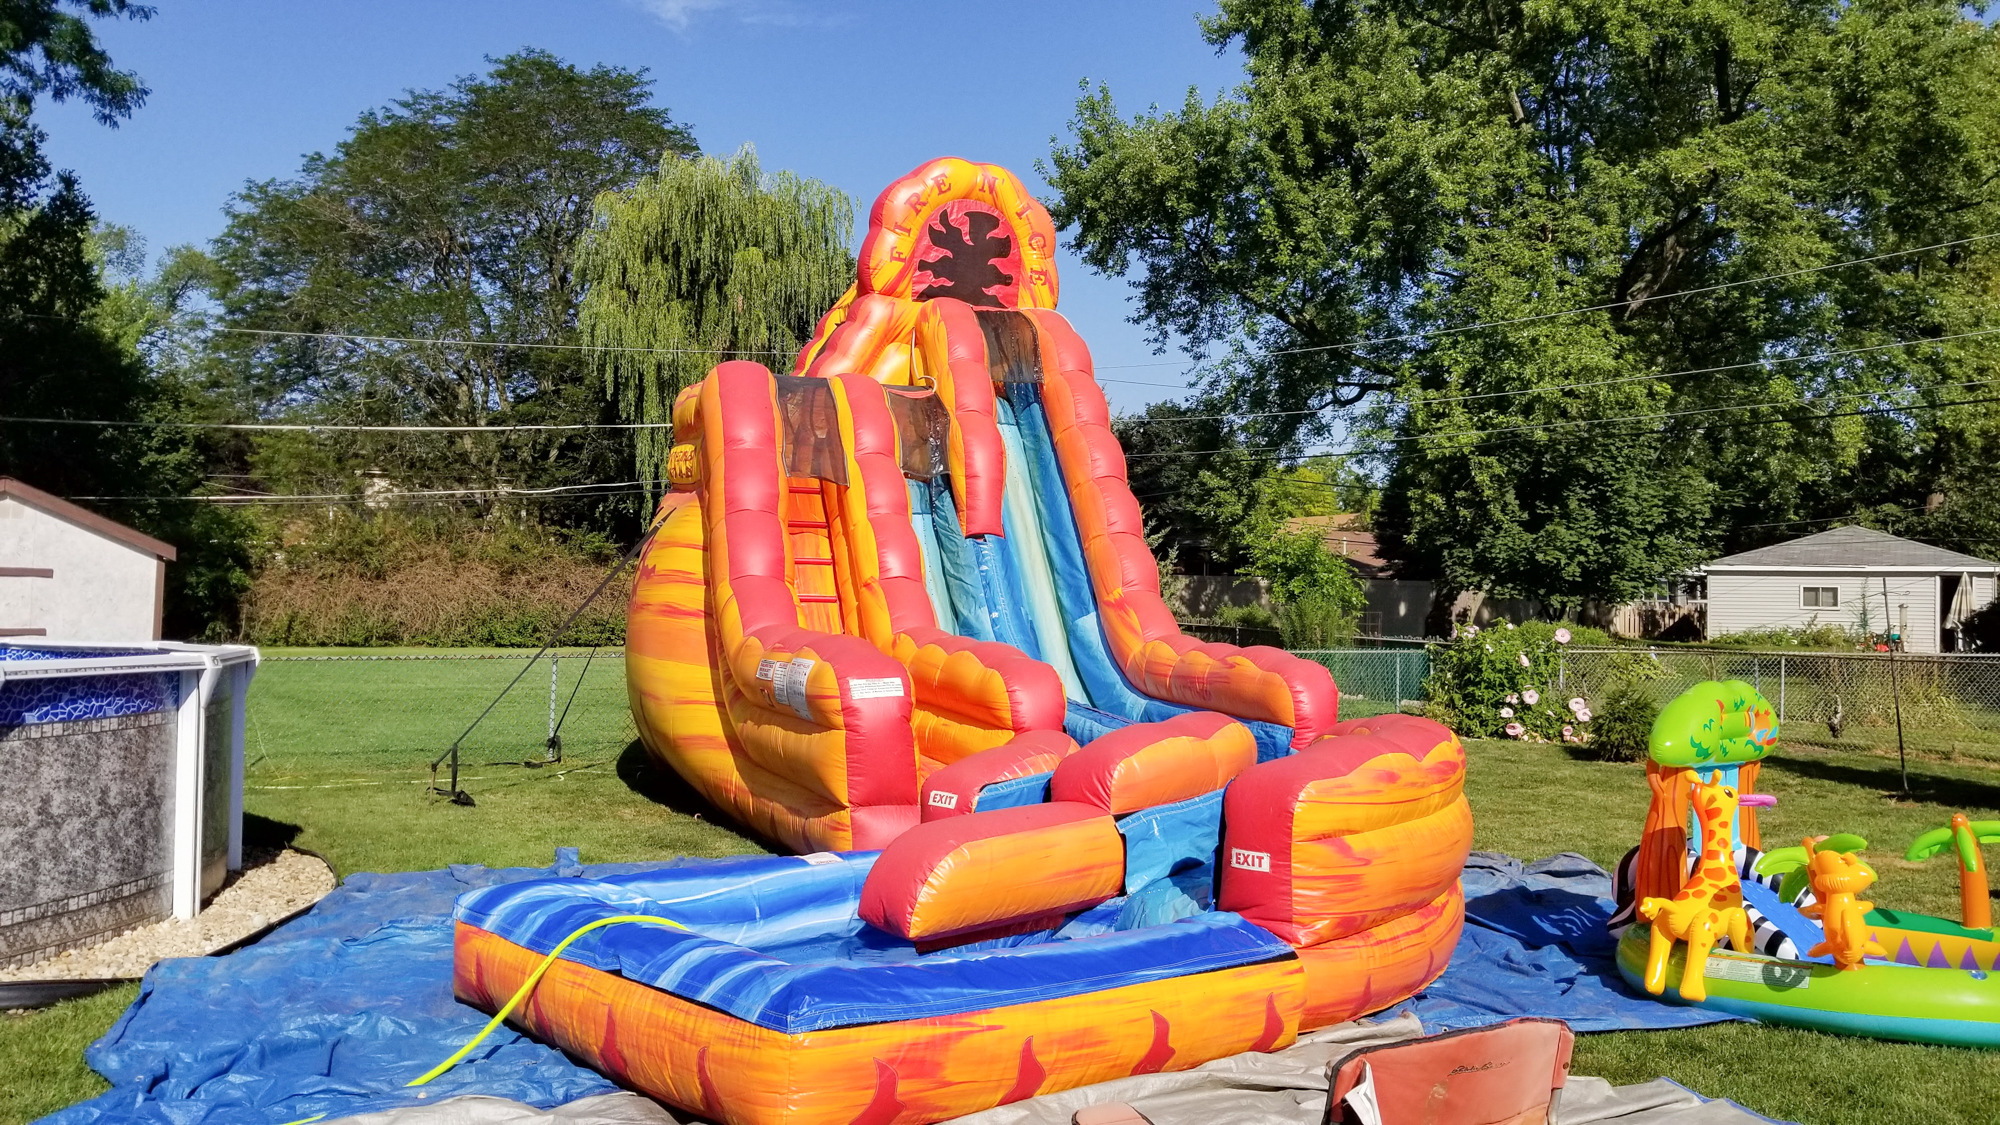 Fire n' ice inflatable water slide in a backyard on a sunny day.